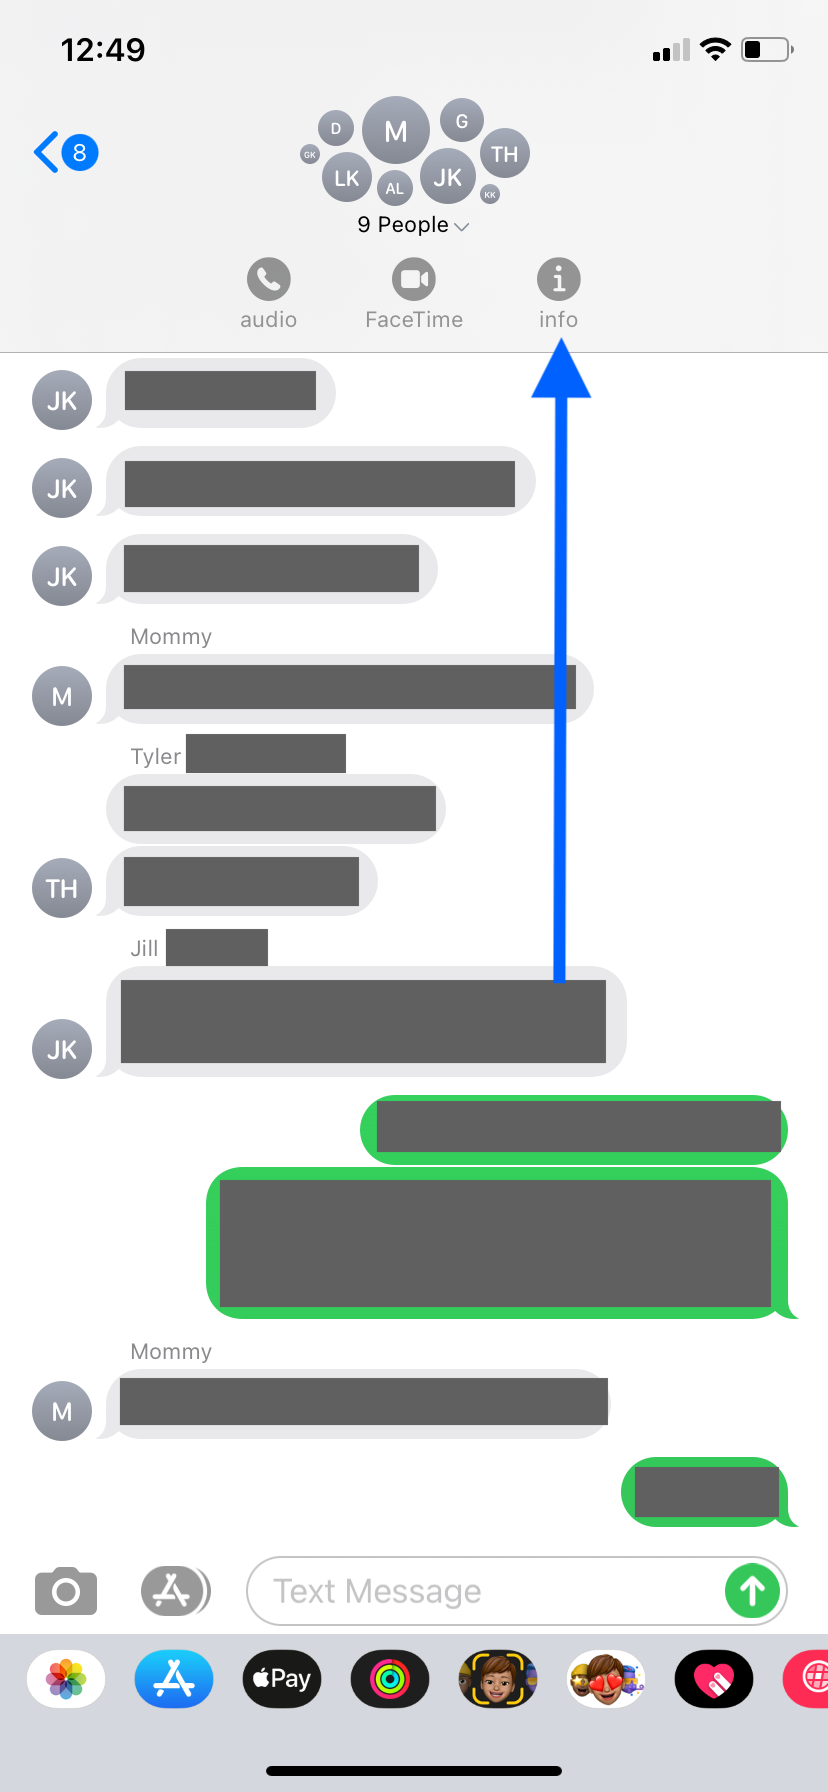 An SMS group chat with the name section drop down menu opened. An arrow points to the info button